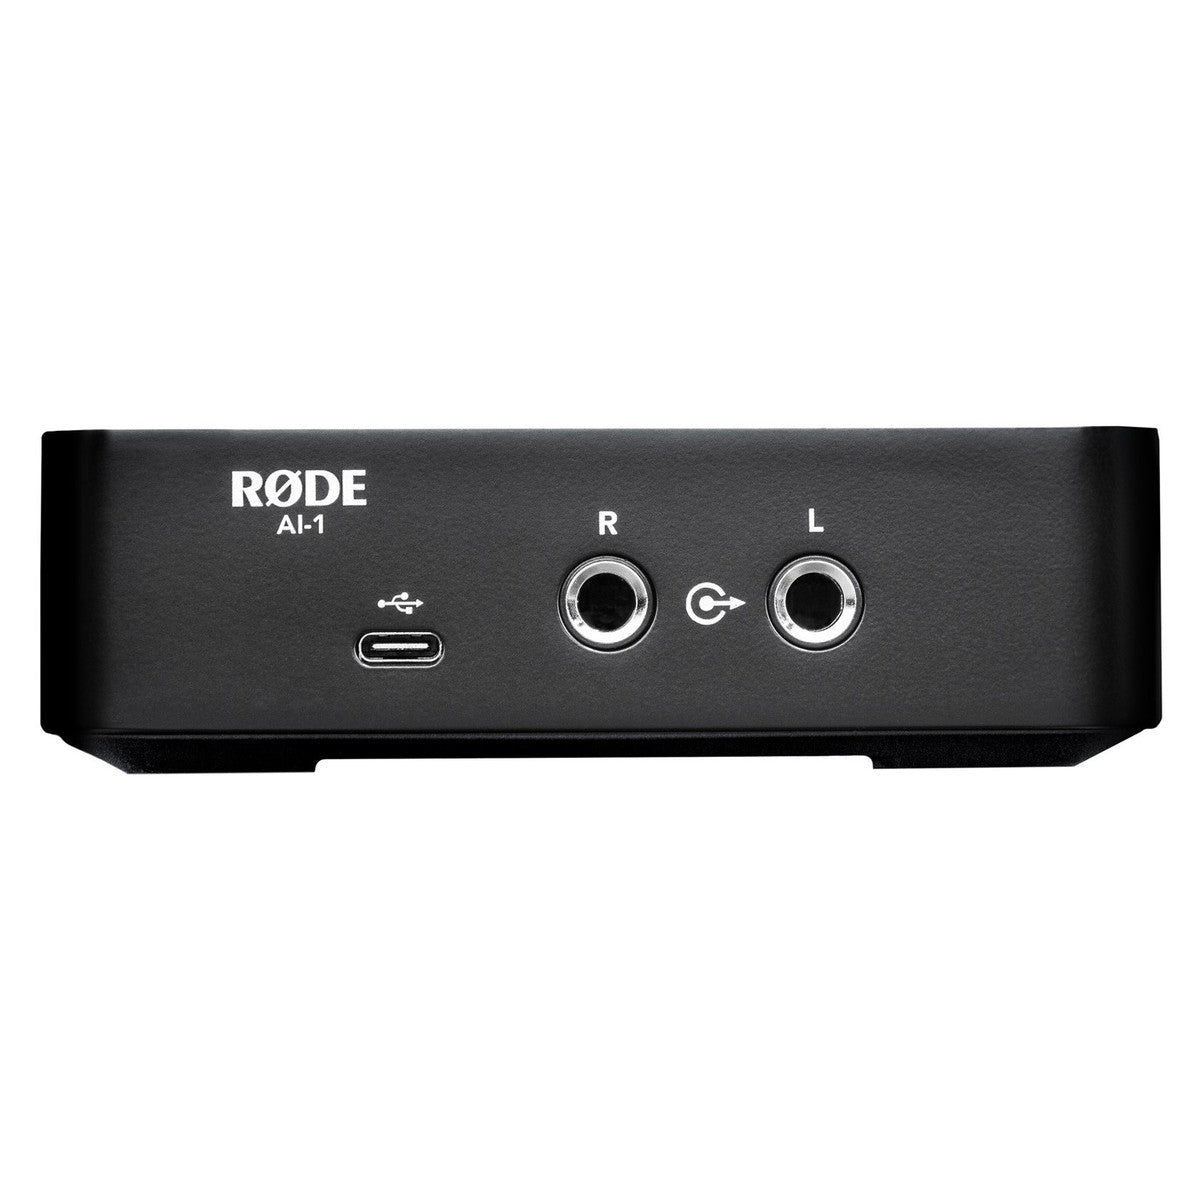 Rode AI-1 Complete Studio Bundle with Rode NT1